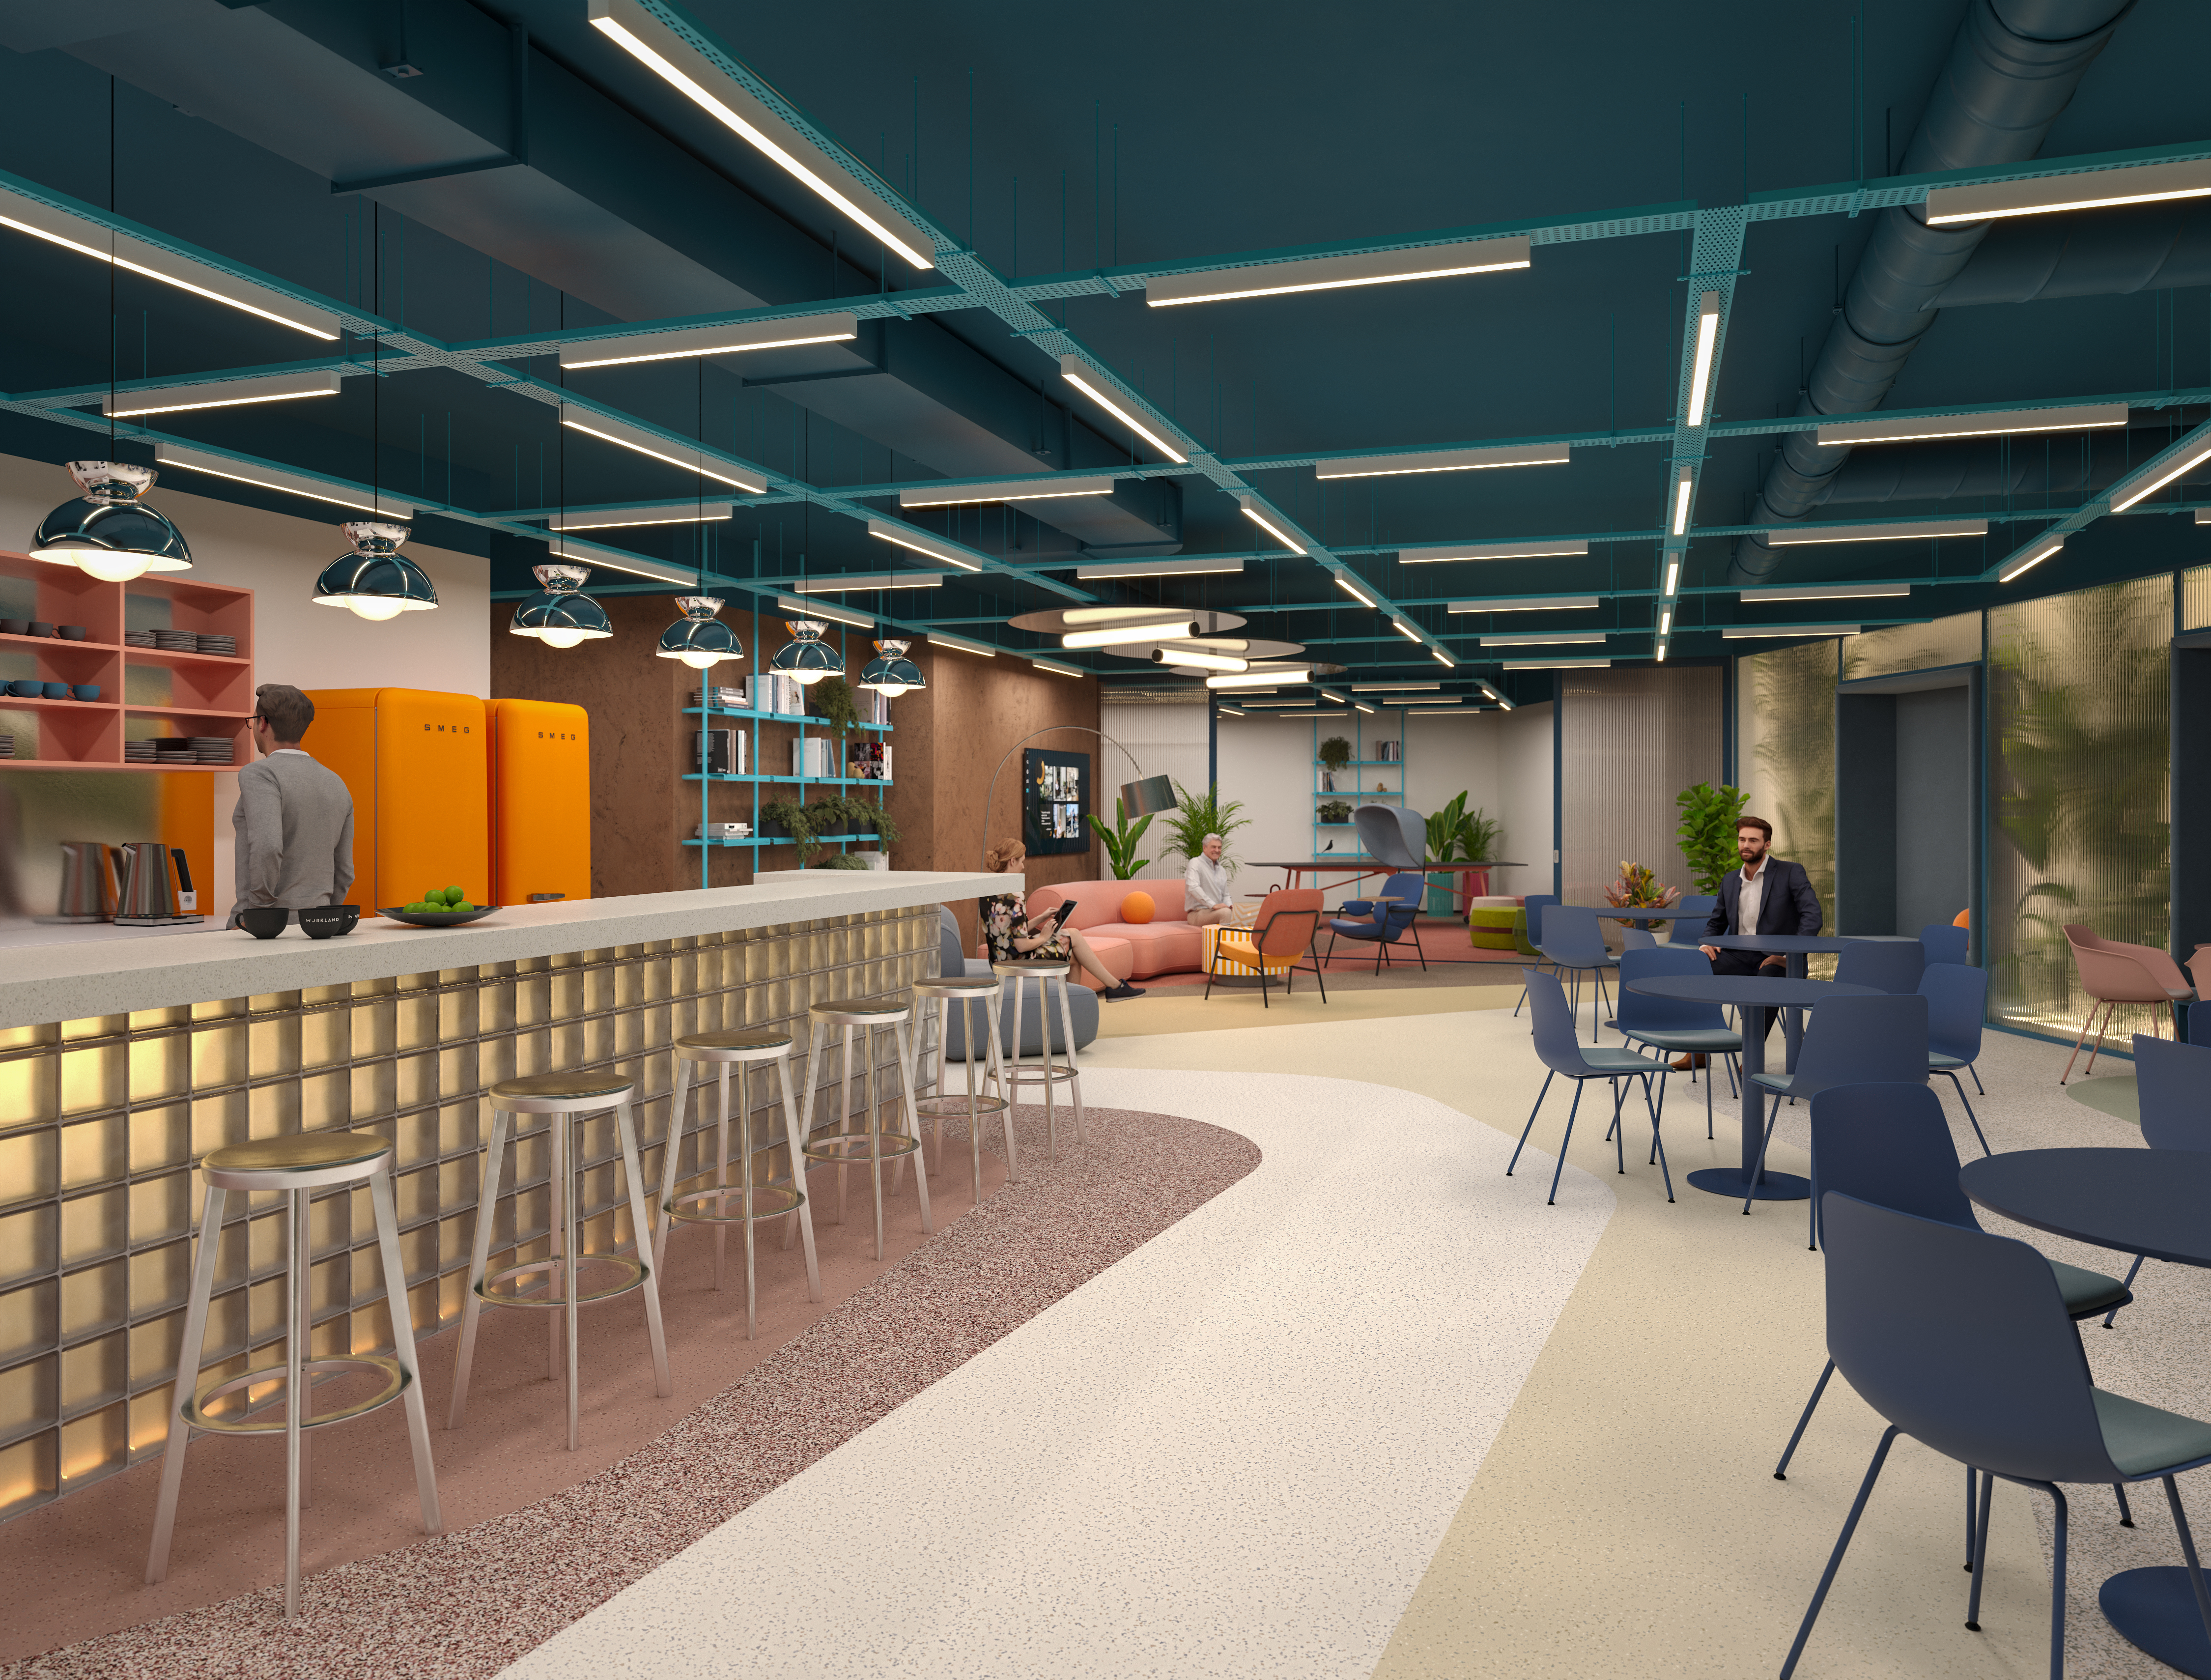 A shared kitchen at Workland Vektor – 3D visual.